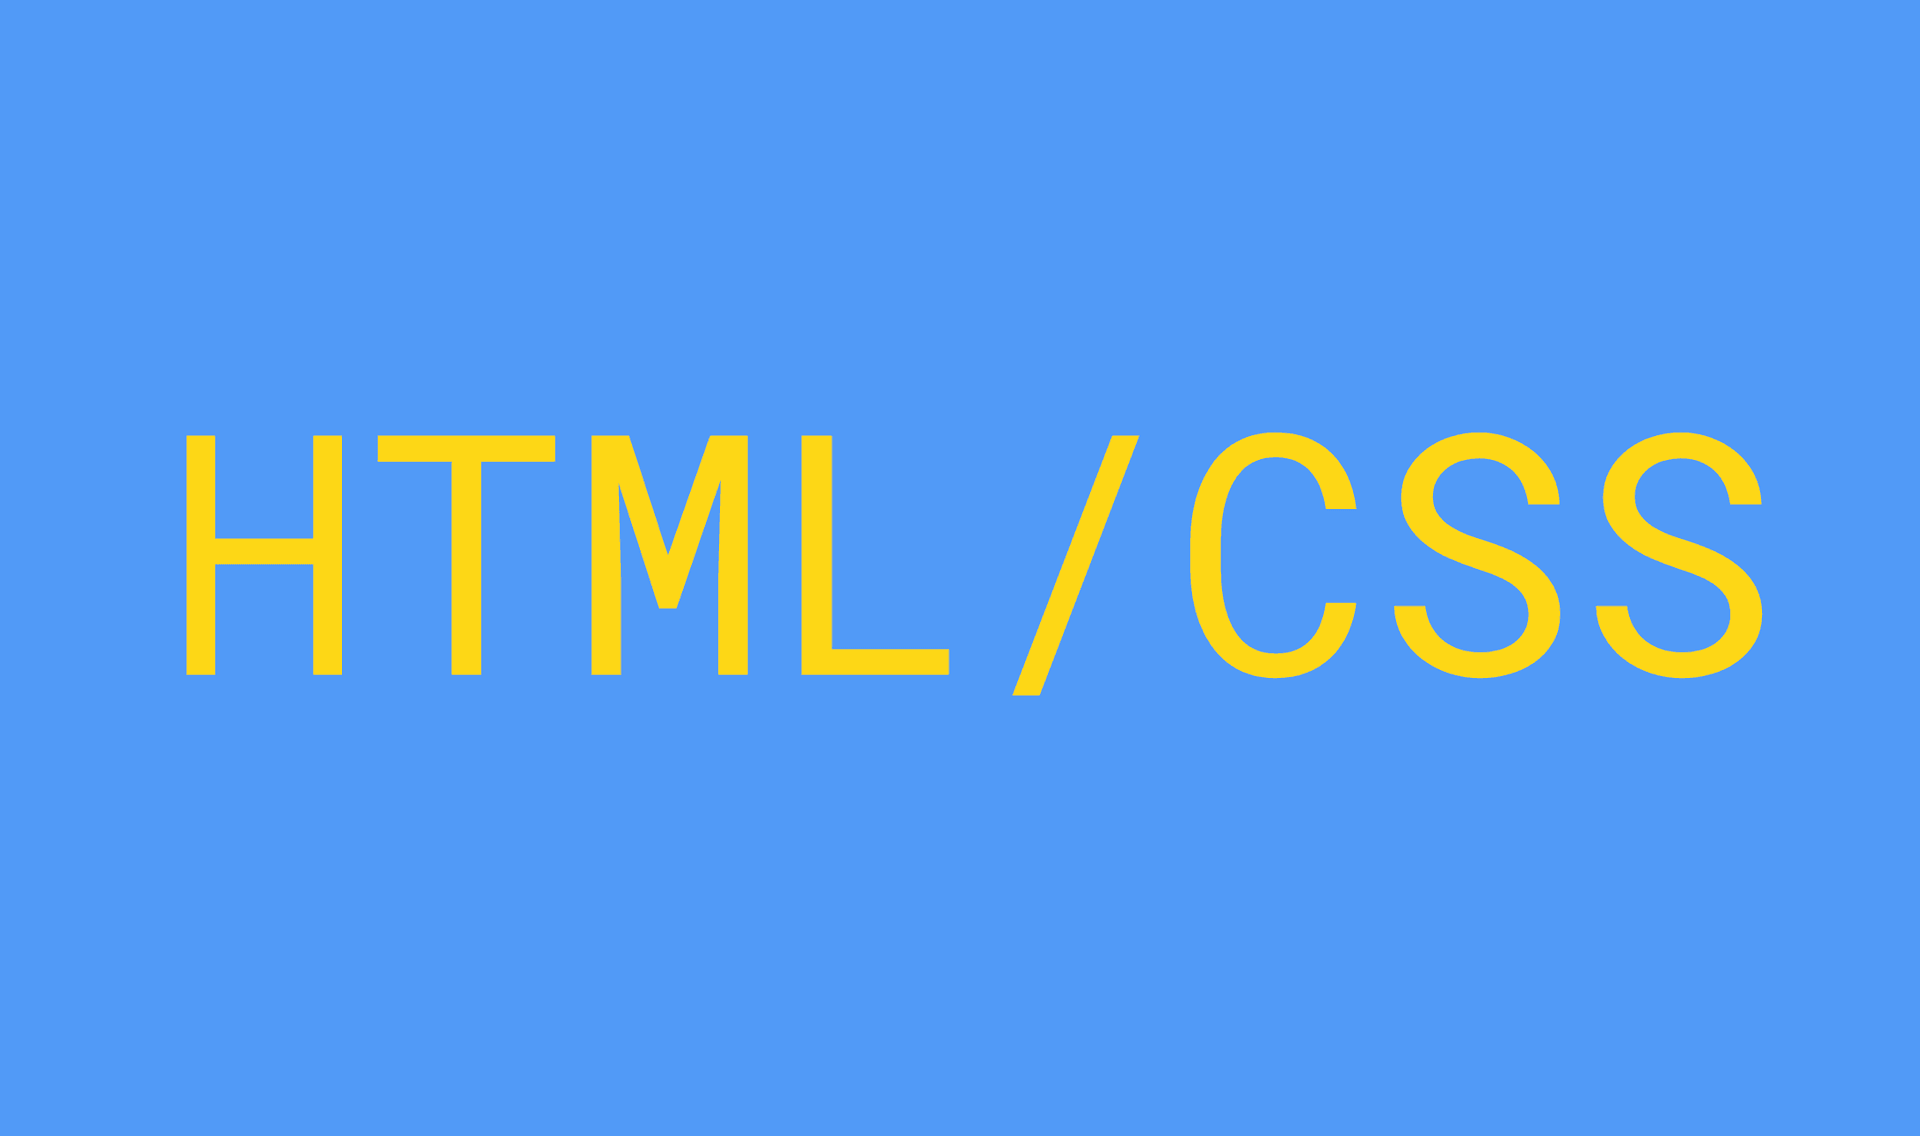 Show details transition using HTML and CSS